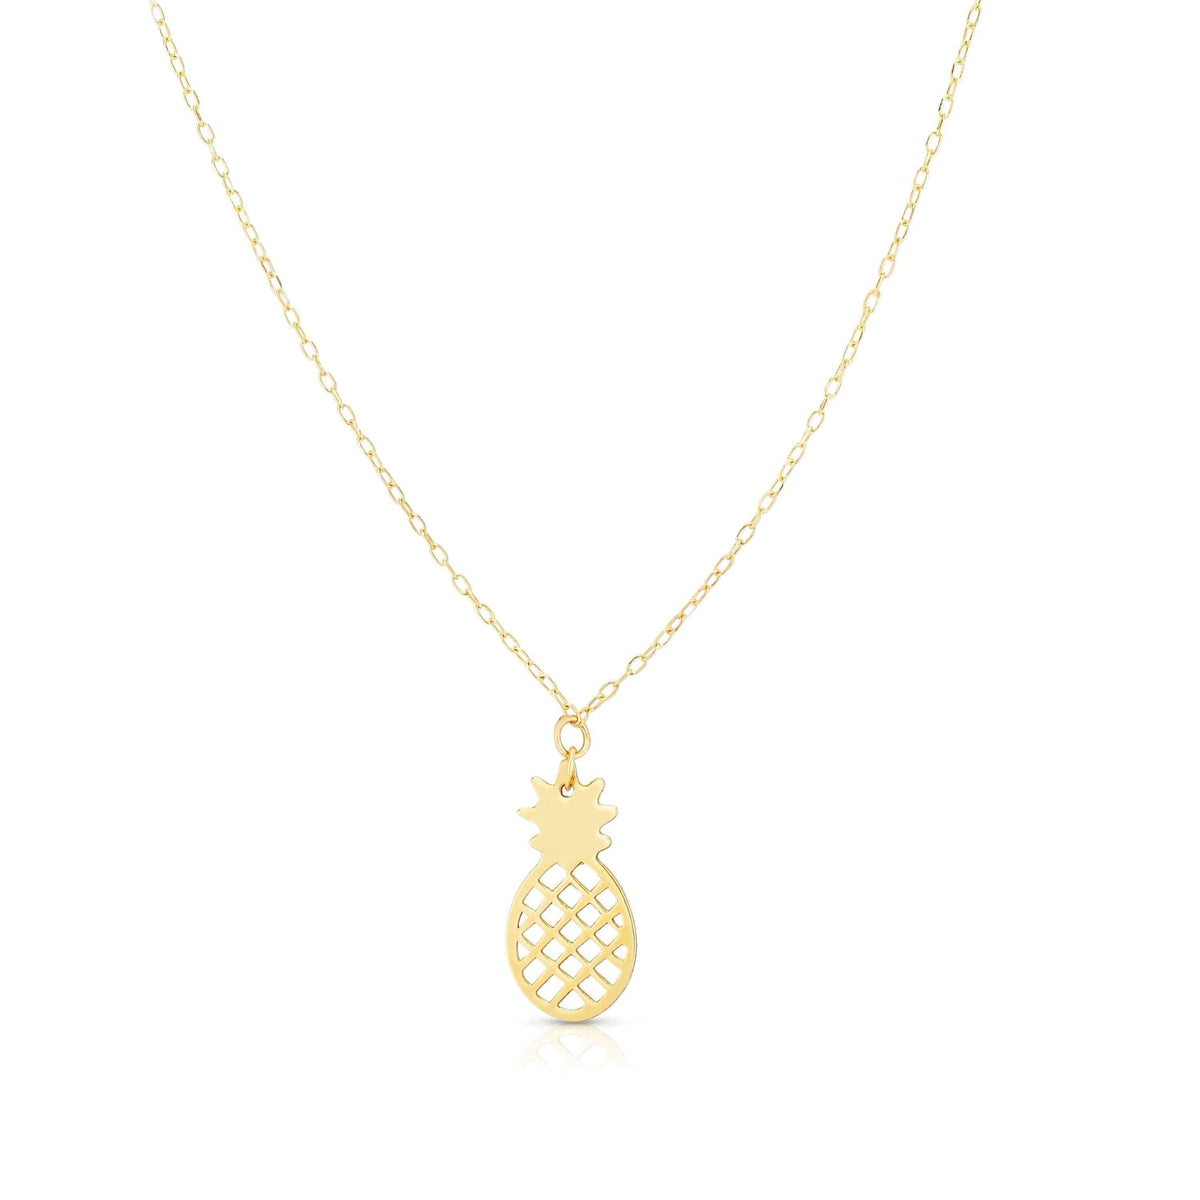 14K Yellow Gold Cut Out Pineapple Pendant Necklace